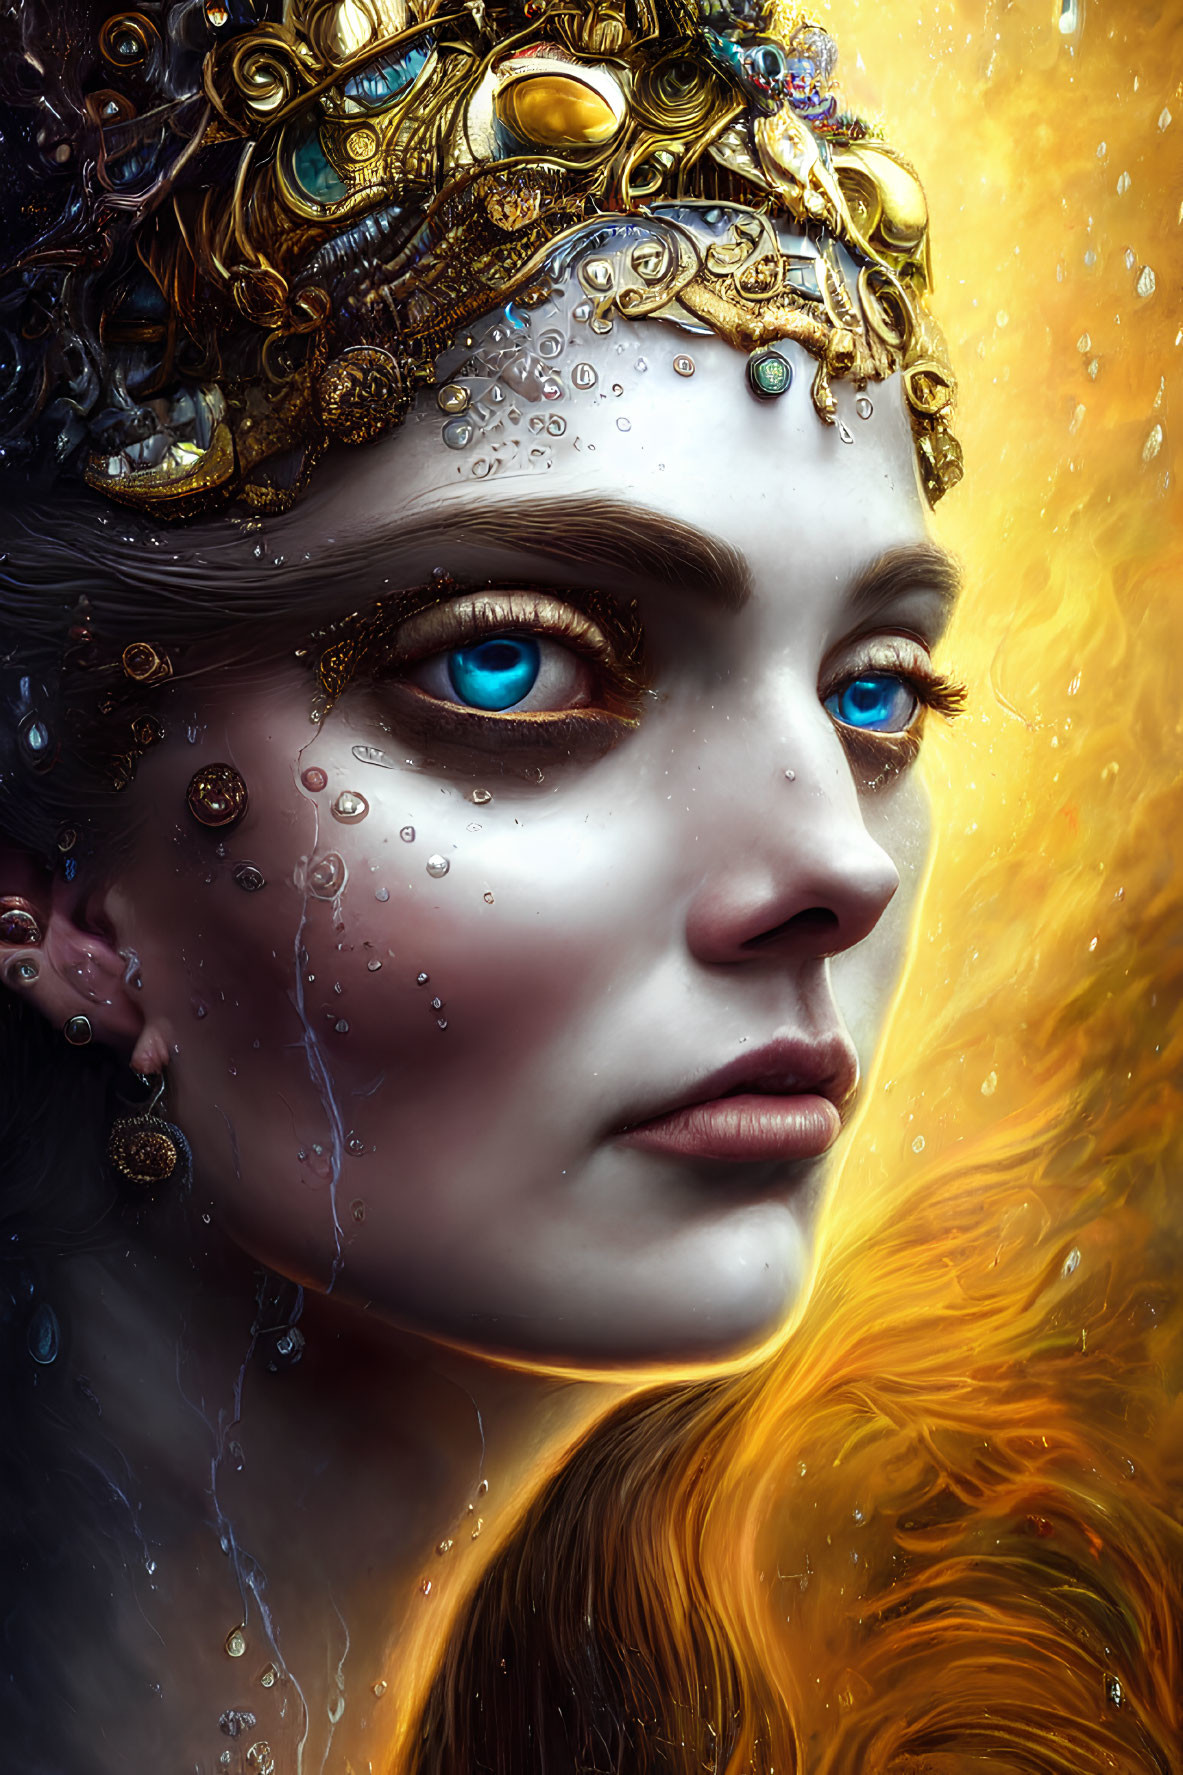 Portrait of Woman with Vibrant Blue Eyes and Ornate Golden Headpiece in Fiery Setting